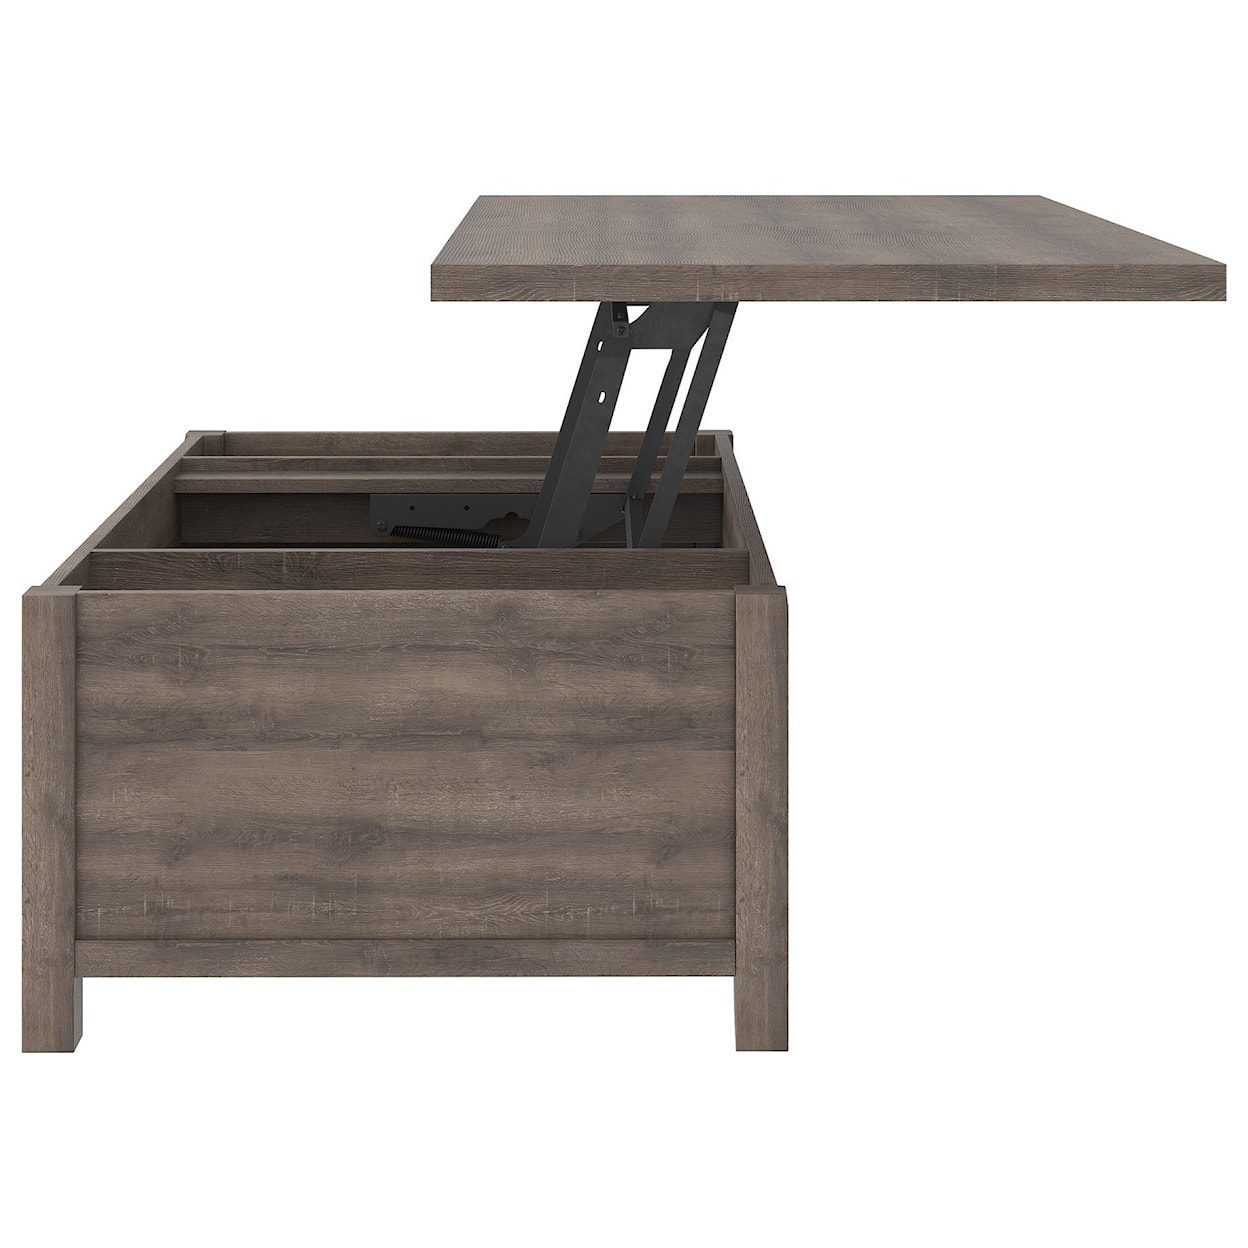 Signature Design by Ashley Arlenbry Rectangular Lift Top Cocktail Table